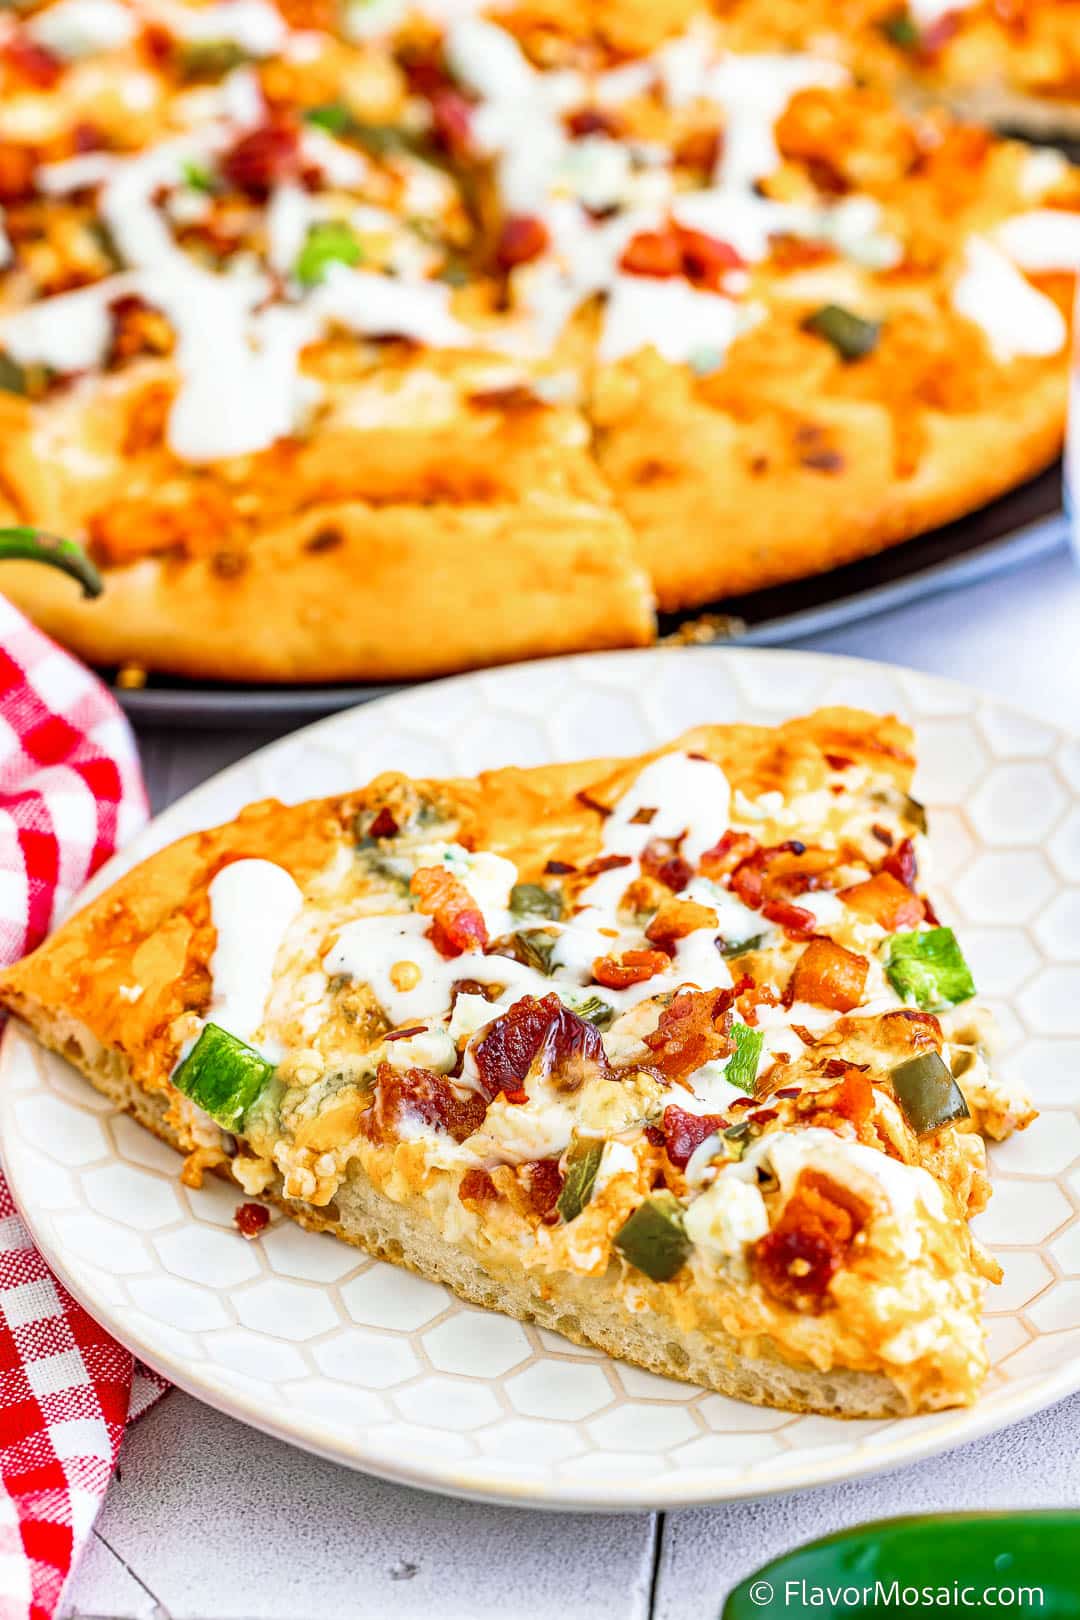 A slice of Buffalo Chicken Jalapeno Popper Pizza with a red and white checkered napkin on the left and a partial blurred view of the rest of the pizza on a pizza pan in the background at the top of the photo.